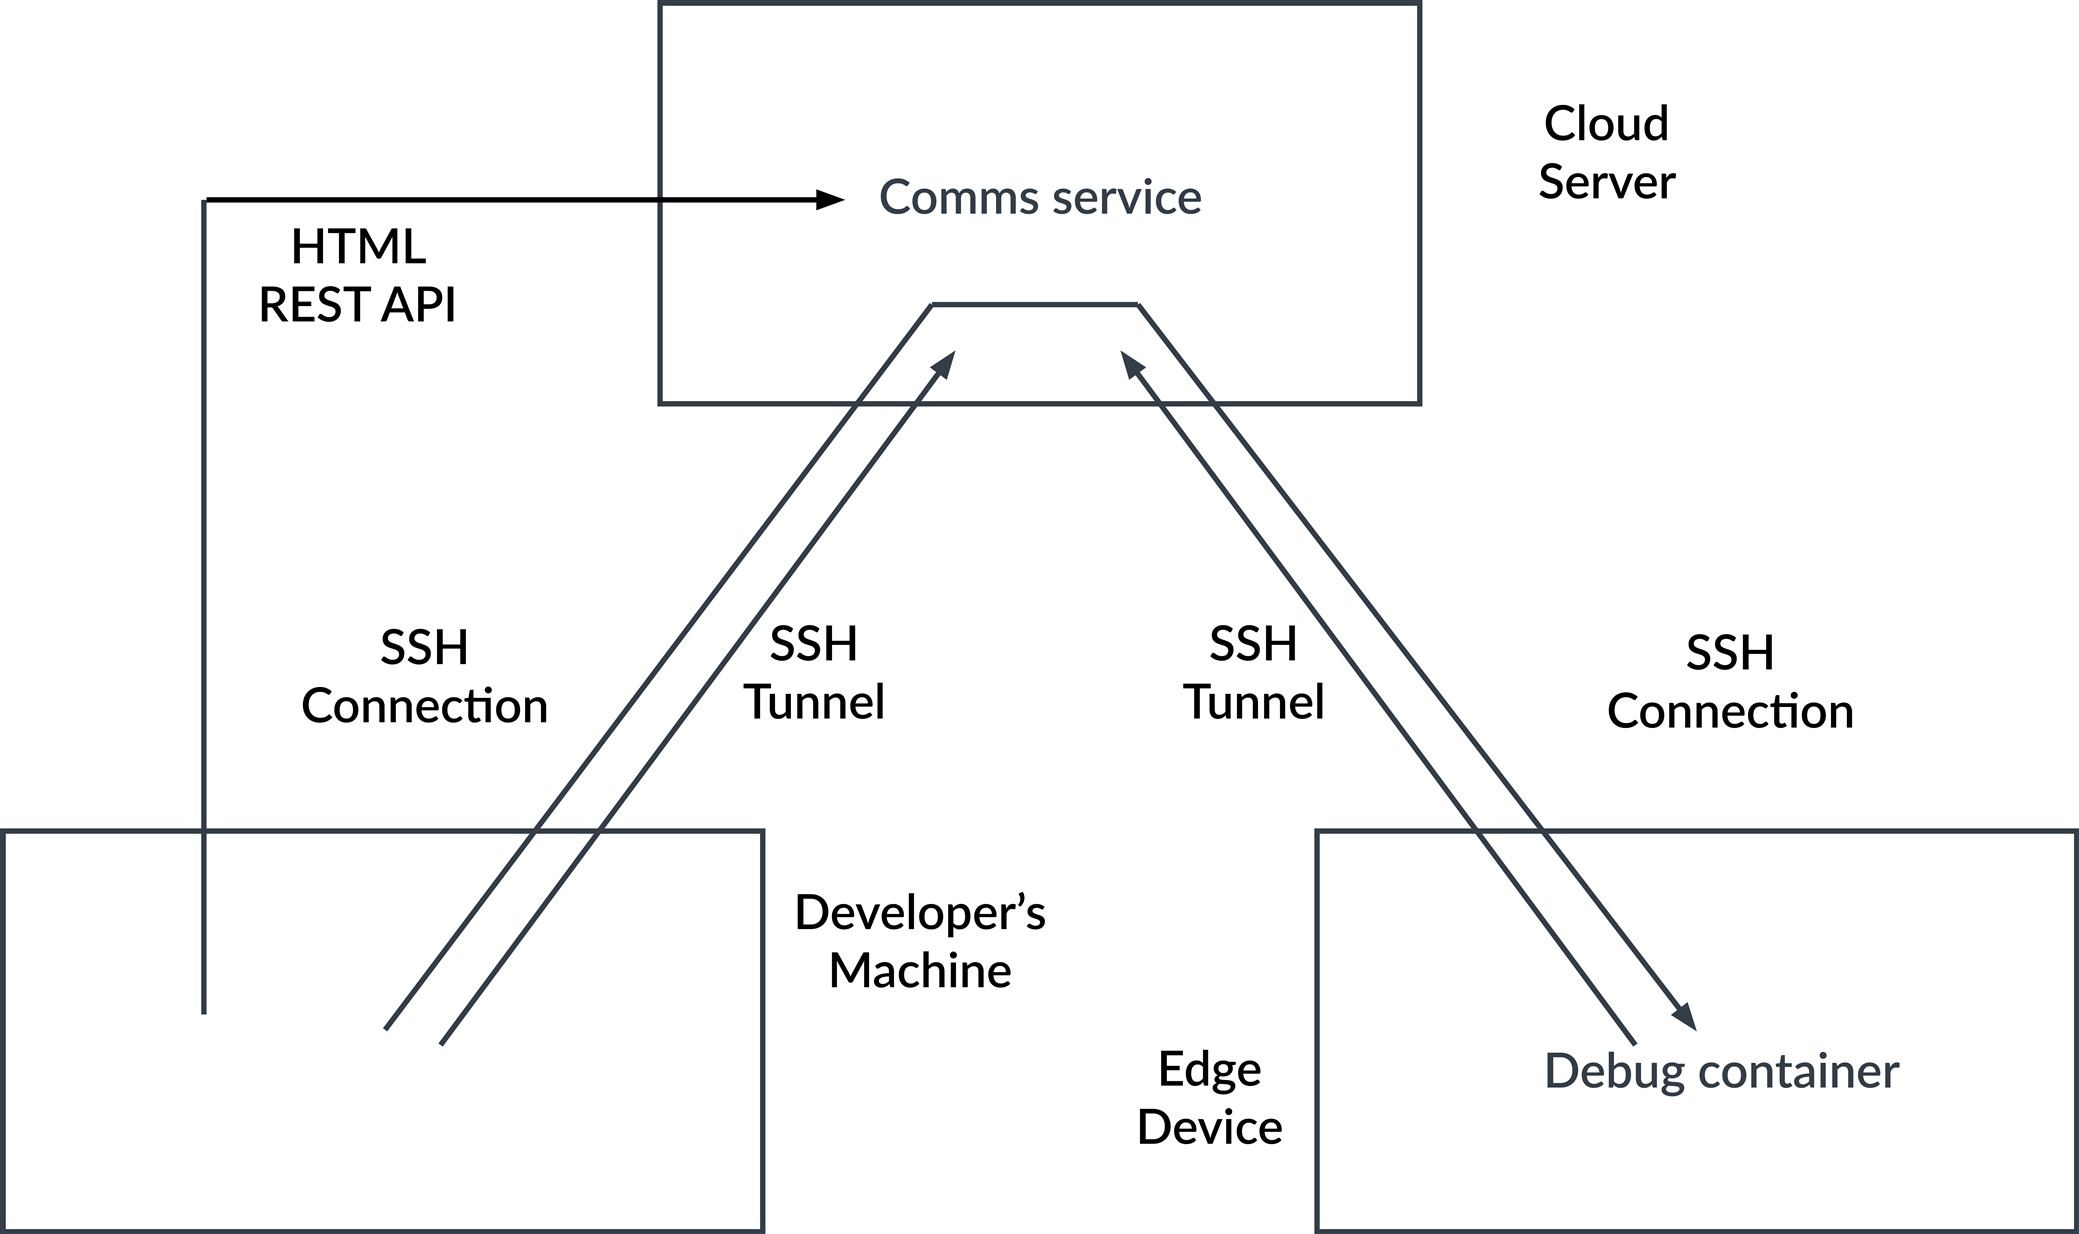 A diagram demonstrating the comms services workflow